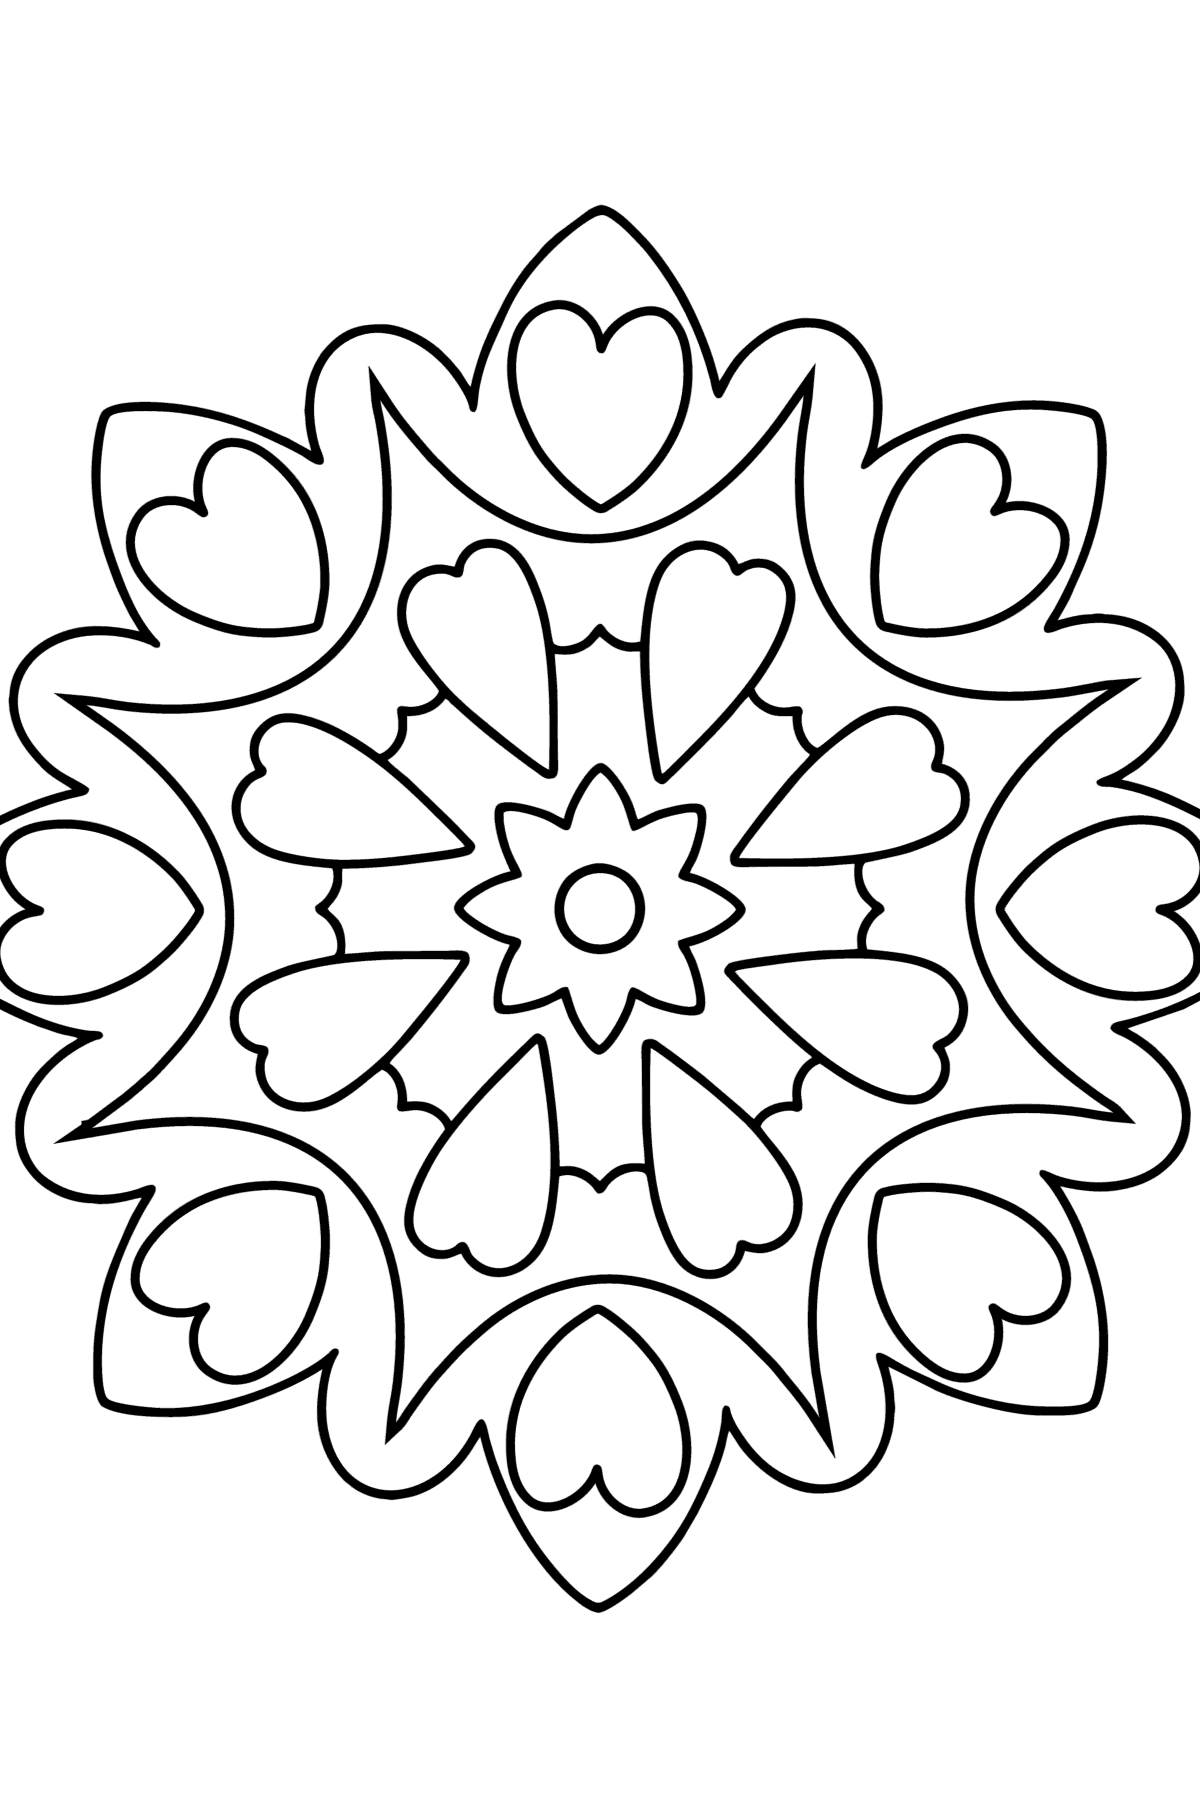 Mandala coloring page - 21 elements - Coloring Pages for Kids